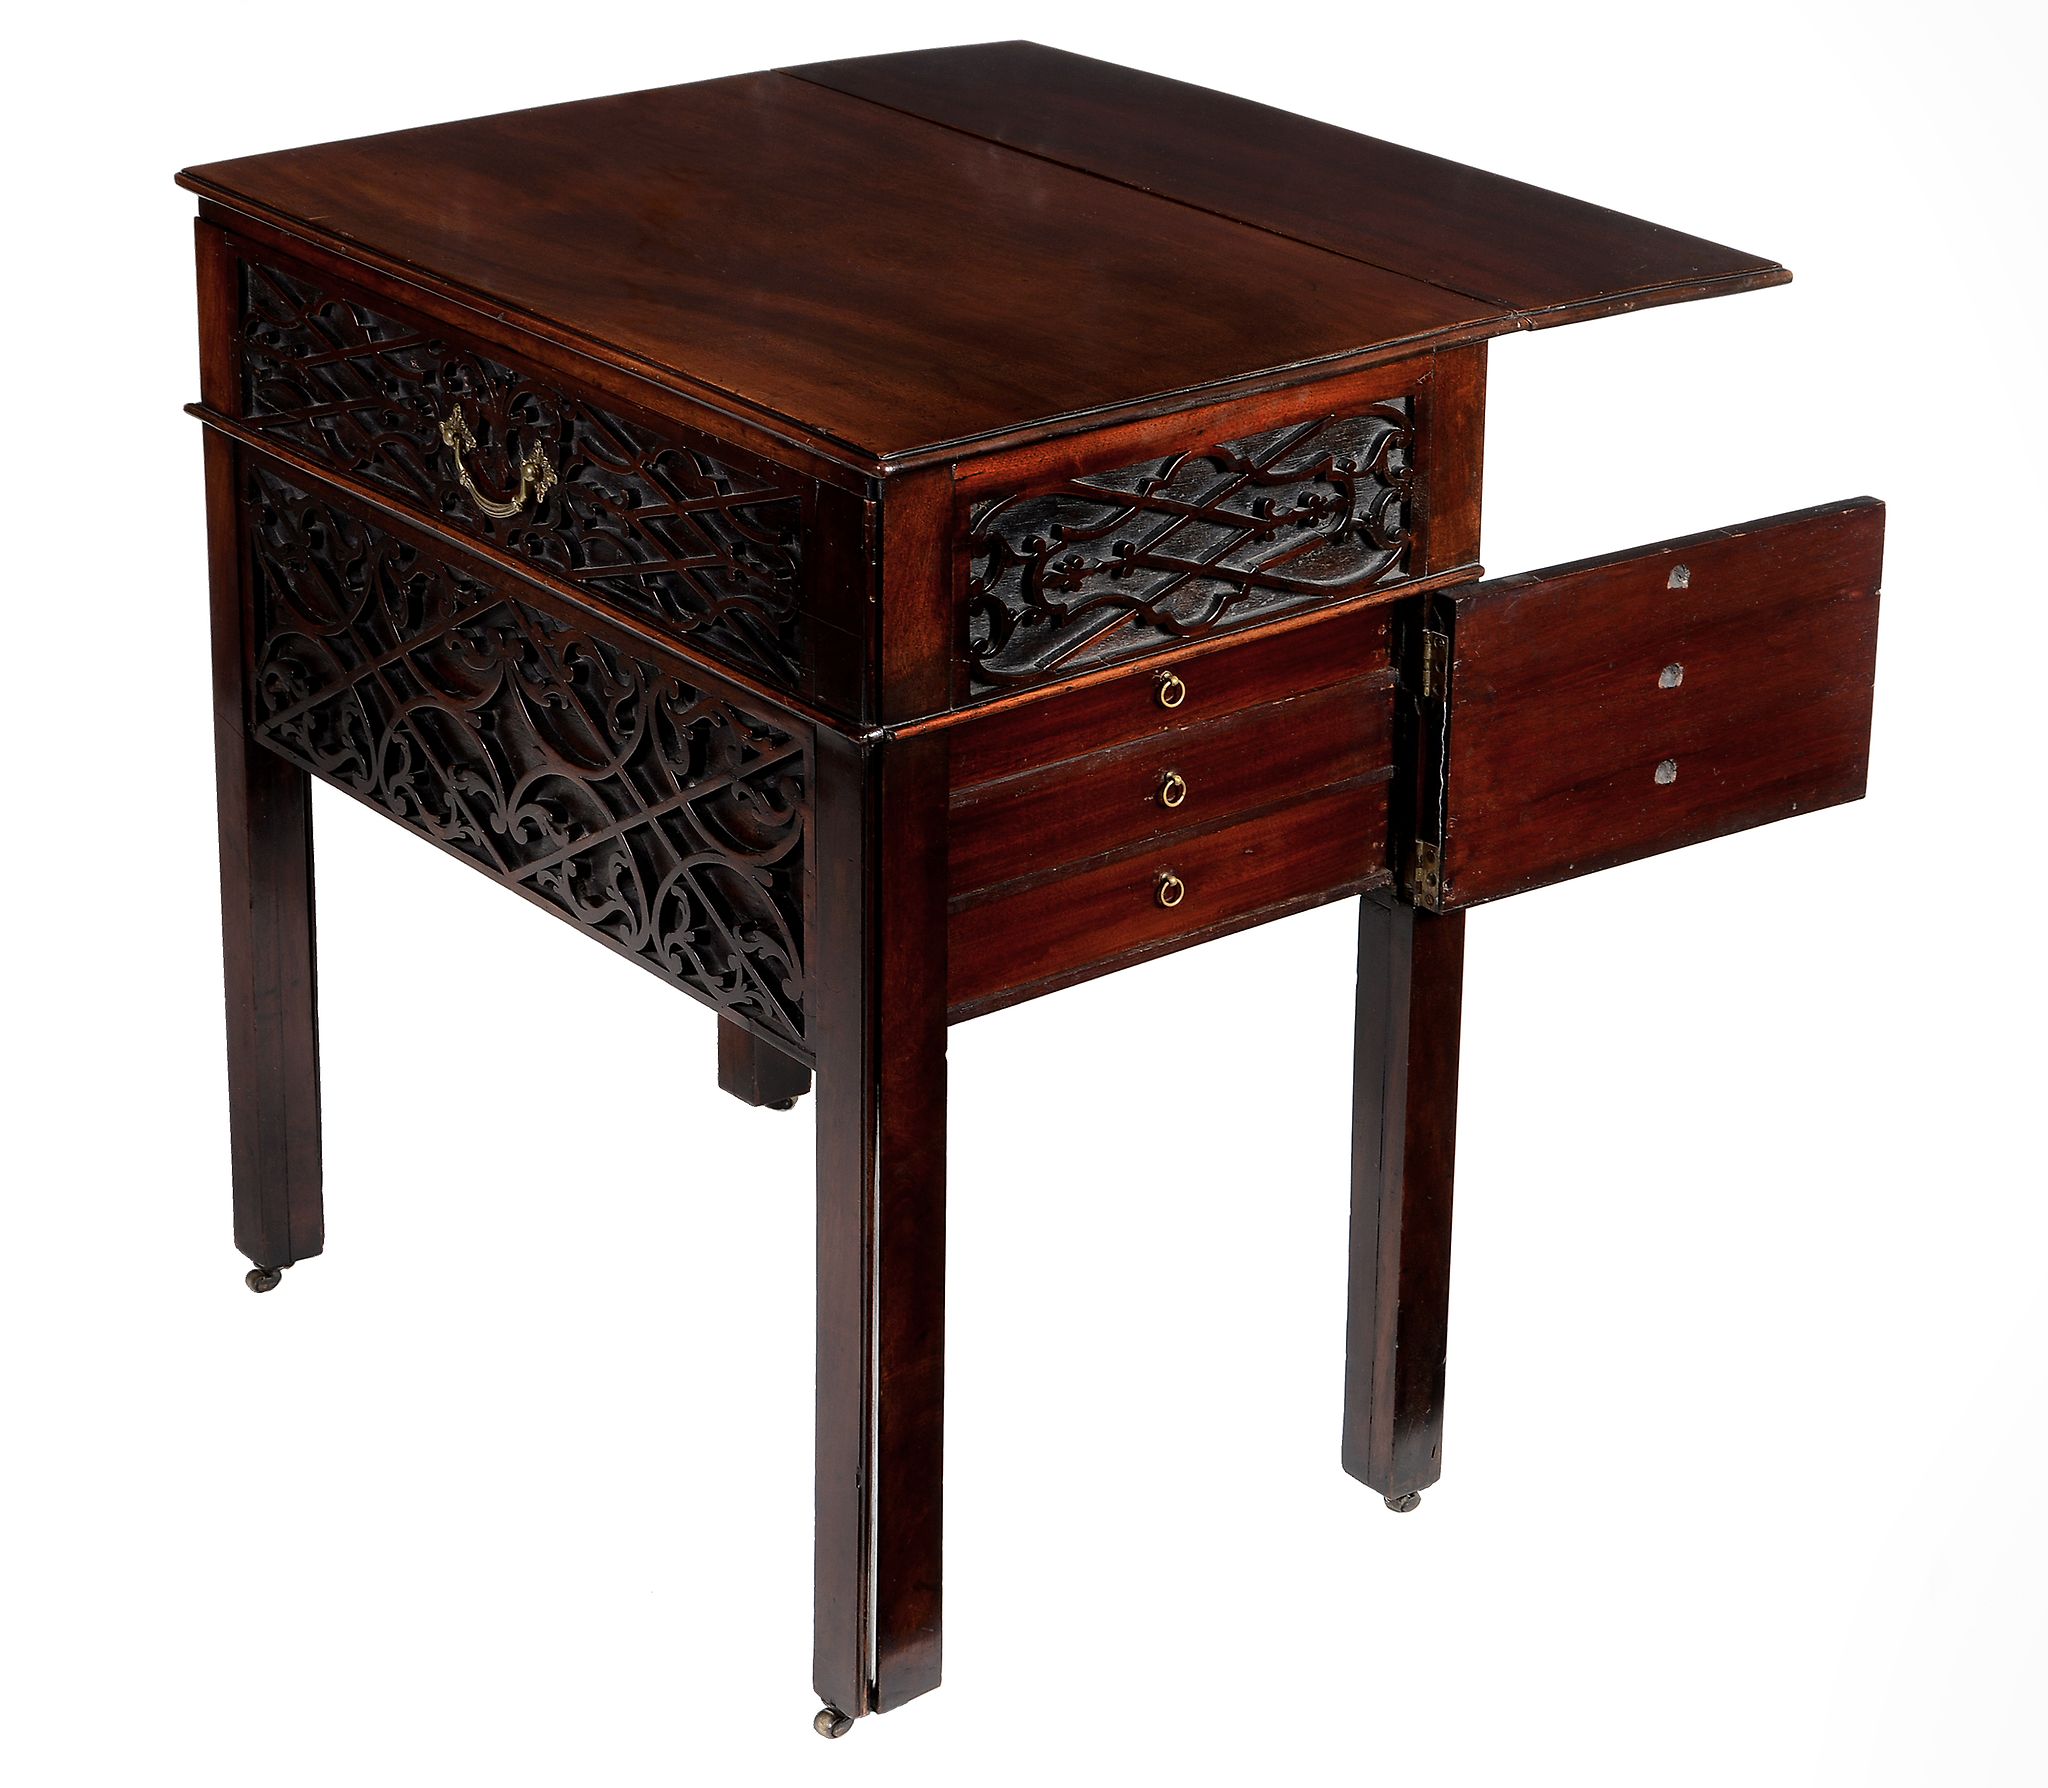 A George III mahogany writing table,   circa 1780, the rectangular moulded top with hinged rear - Image 2 of 3